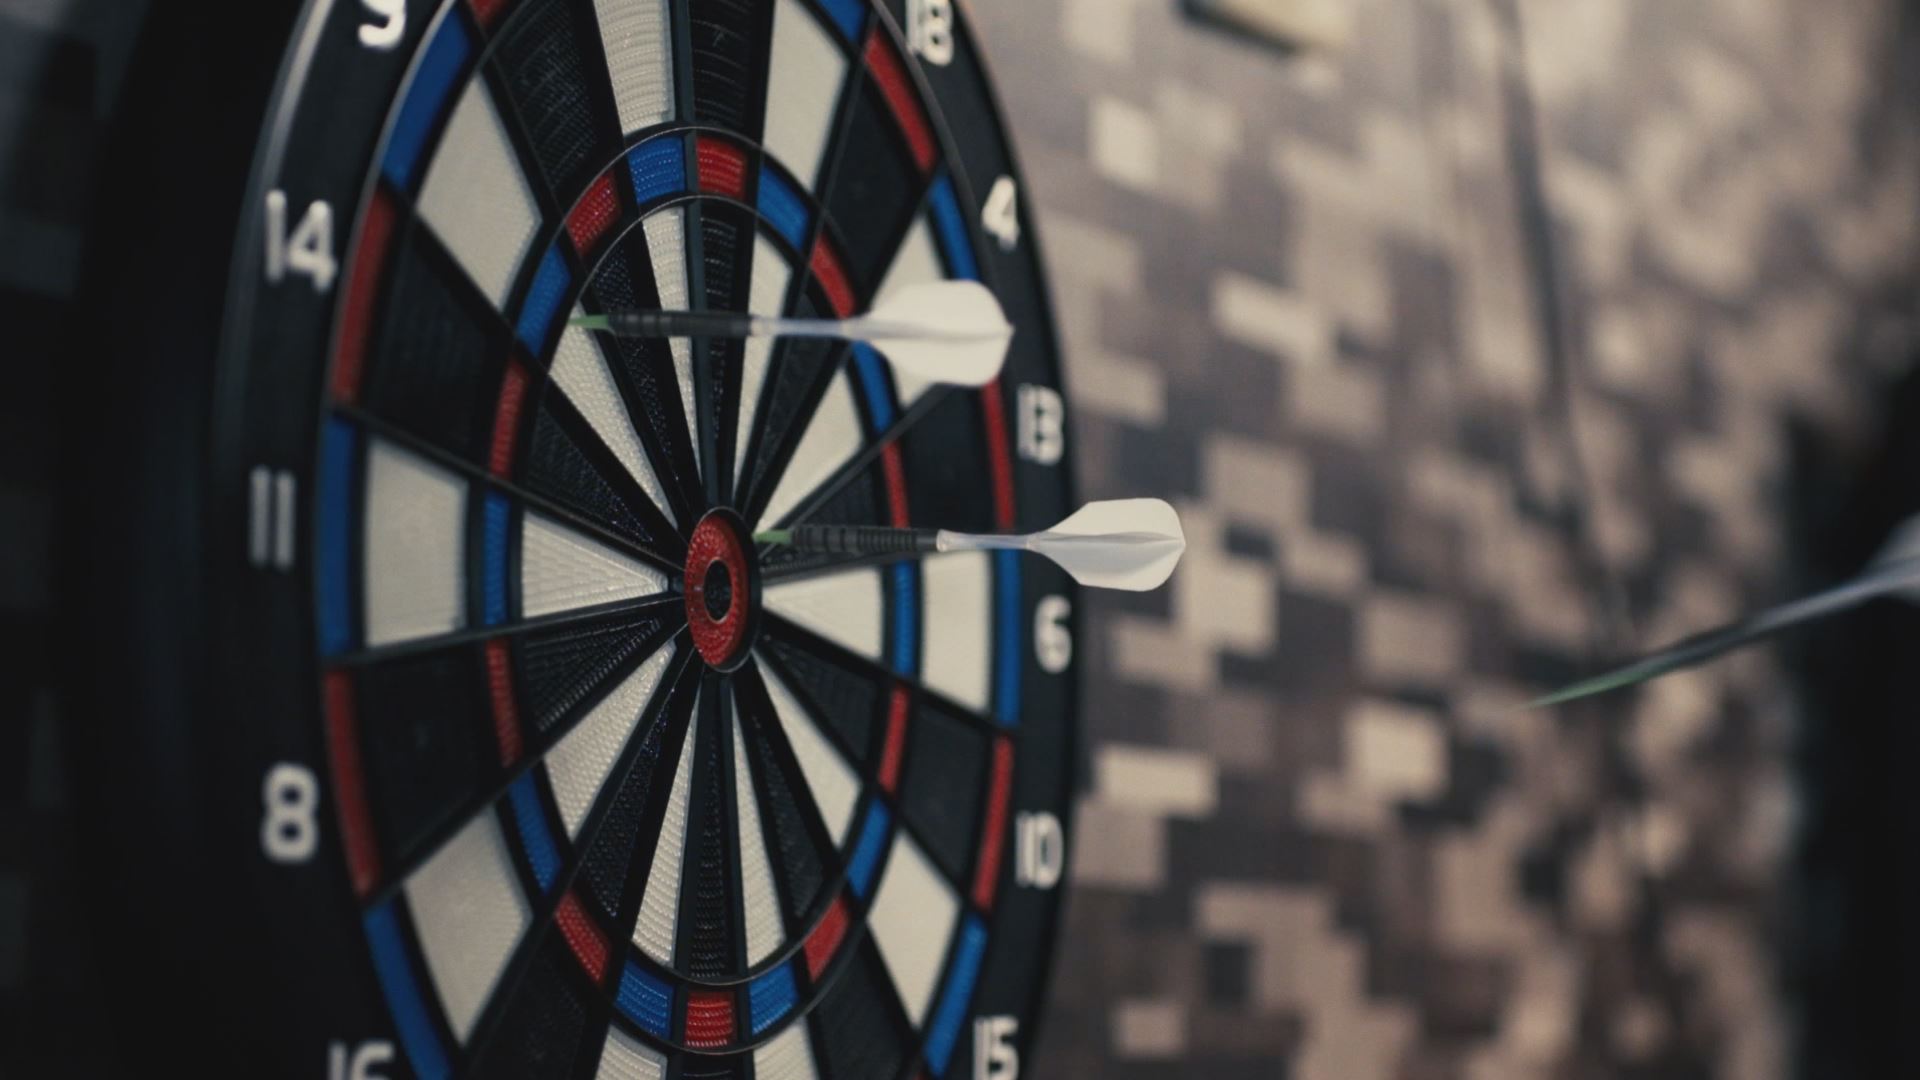 Darts Connect The World S First Smart Dartboard With An Online Platform And Built In Camera Is Now Accepting Pre Orders On Indiegogo S Indemand Service